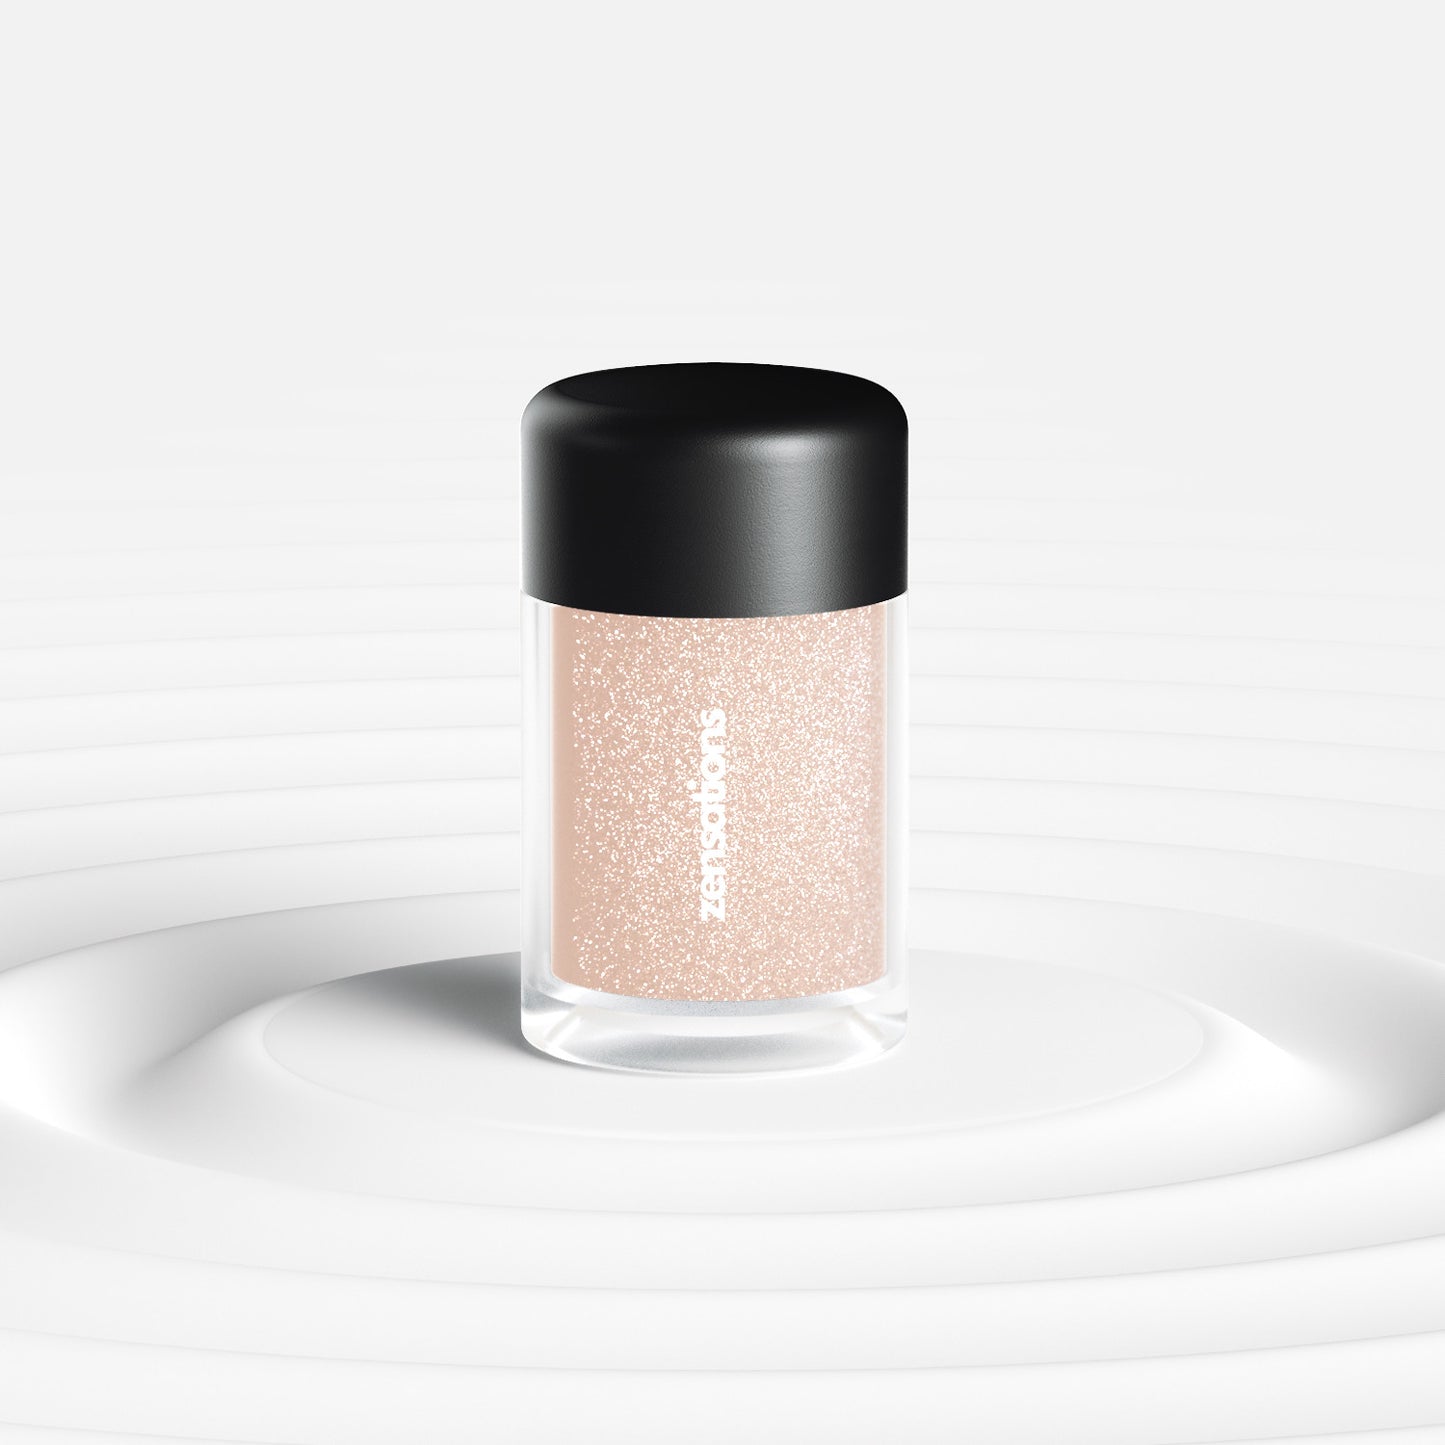 Mineral Stardust Gives A Glamified Look to Eyes, Body, and Nails.